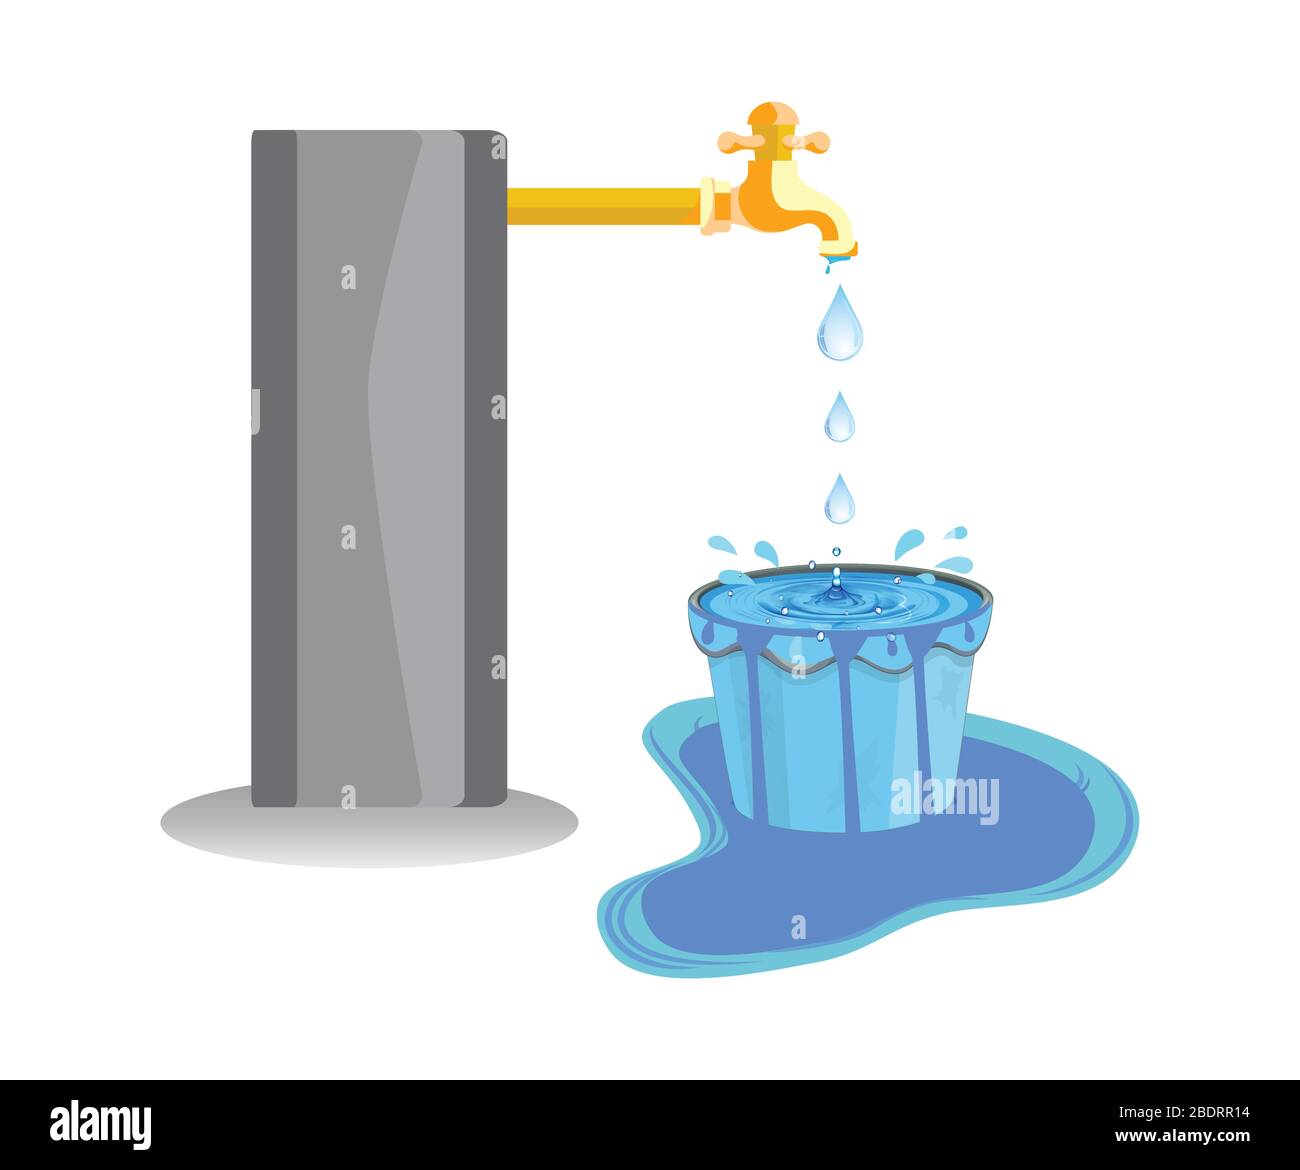 Wastage of water theme. Wastage of water from running tap as bucket is overflow with the water. Wastage of water drop from overflowing bucket and spre Stock Vector